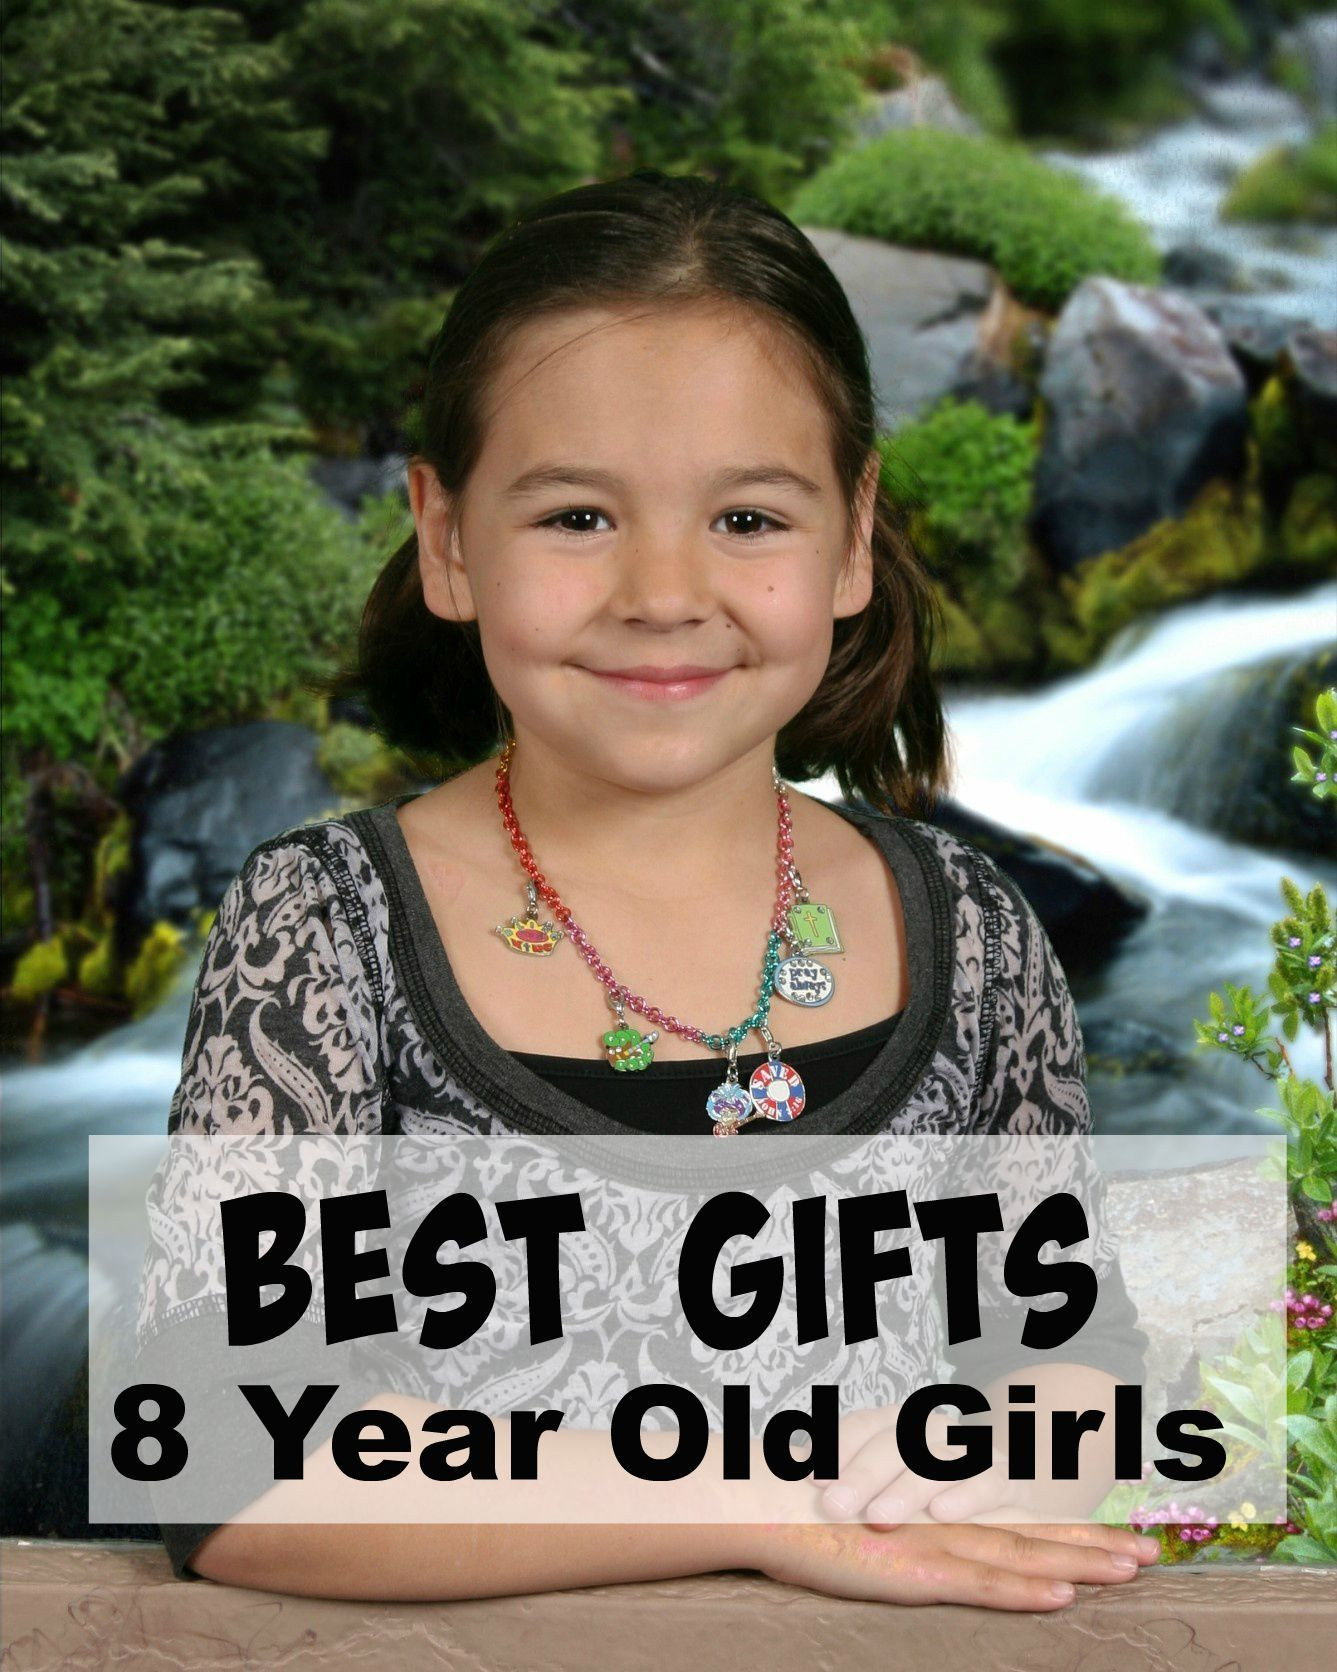 Gift Ideas For Girls Age 8
 25 Spectacular Gift Ideas For 8 Year Old Girls That WILL